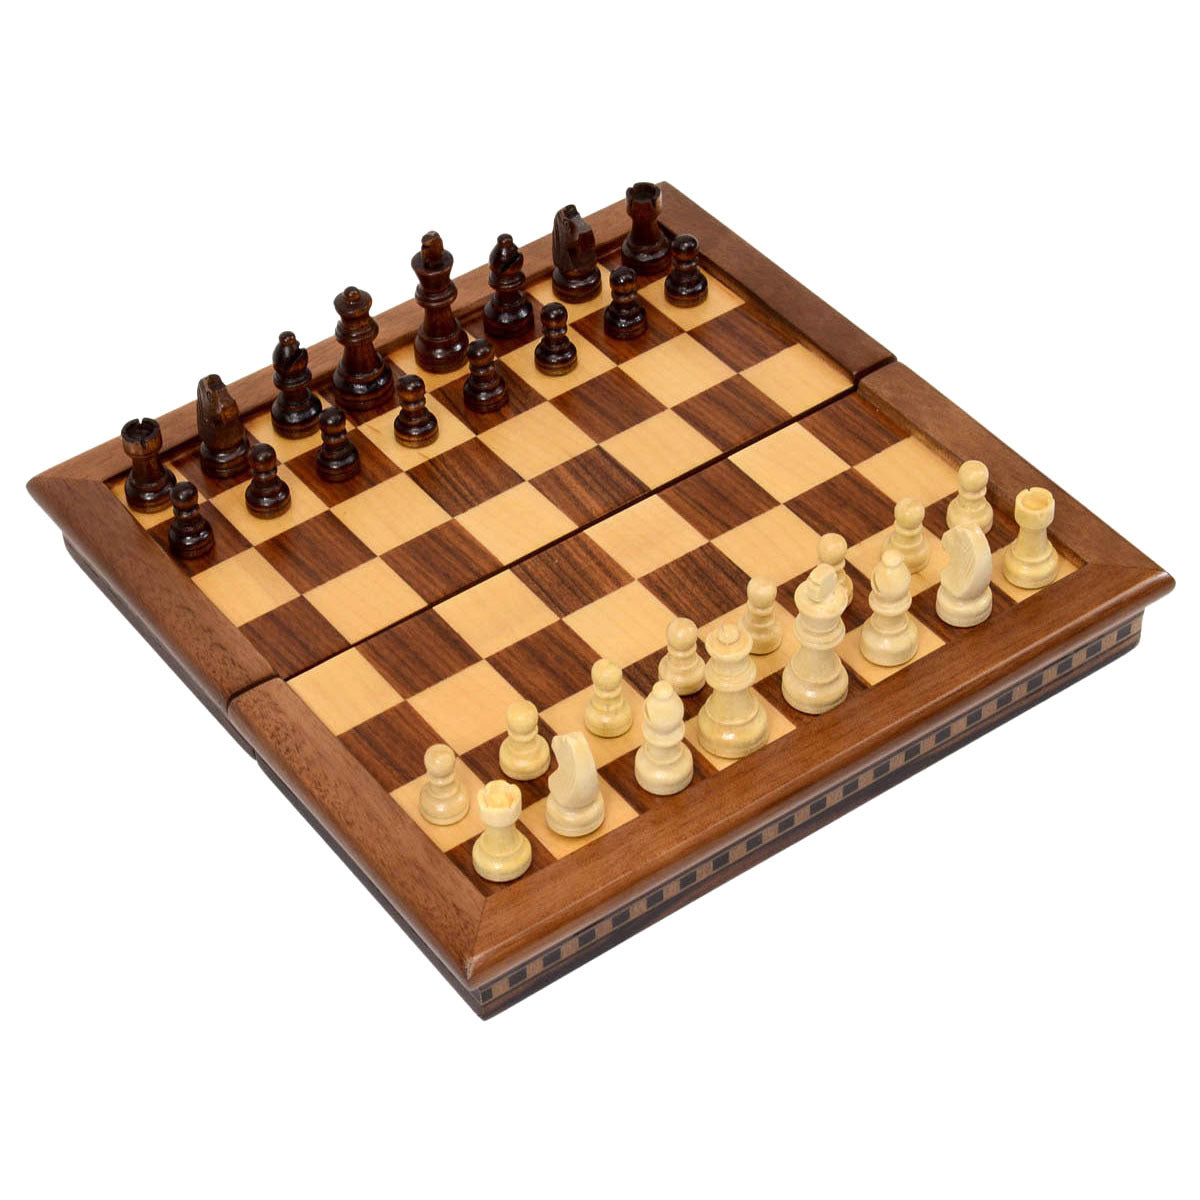 Folding Wooden Chess Set With Decorative Trim